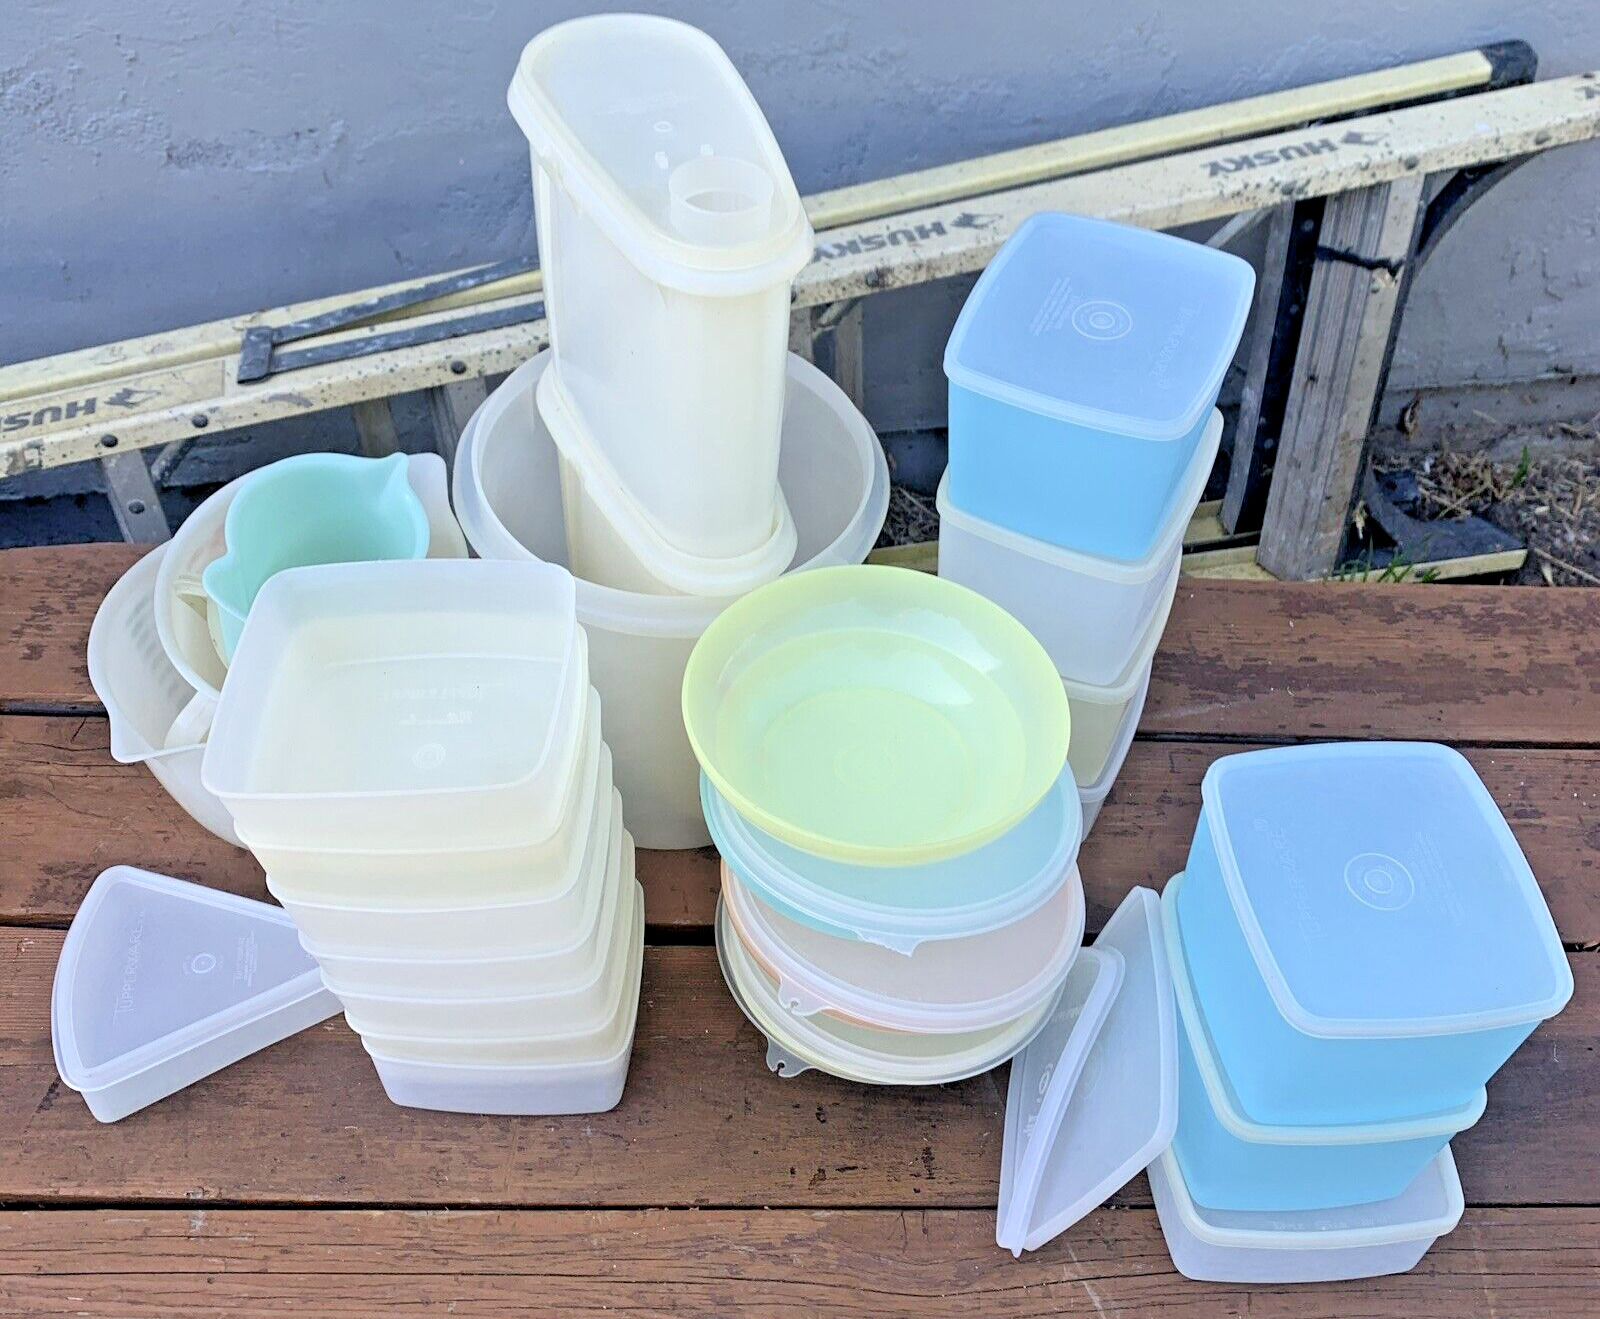 VTG Tupperware Lot Of Various Size & Colors Containers And Measuring Cups 26 PCS